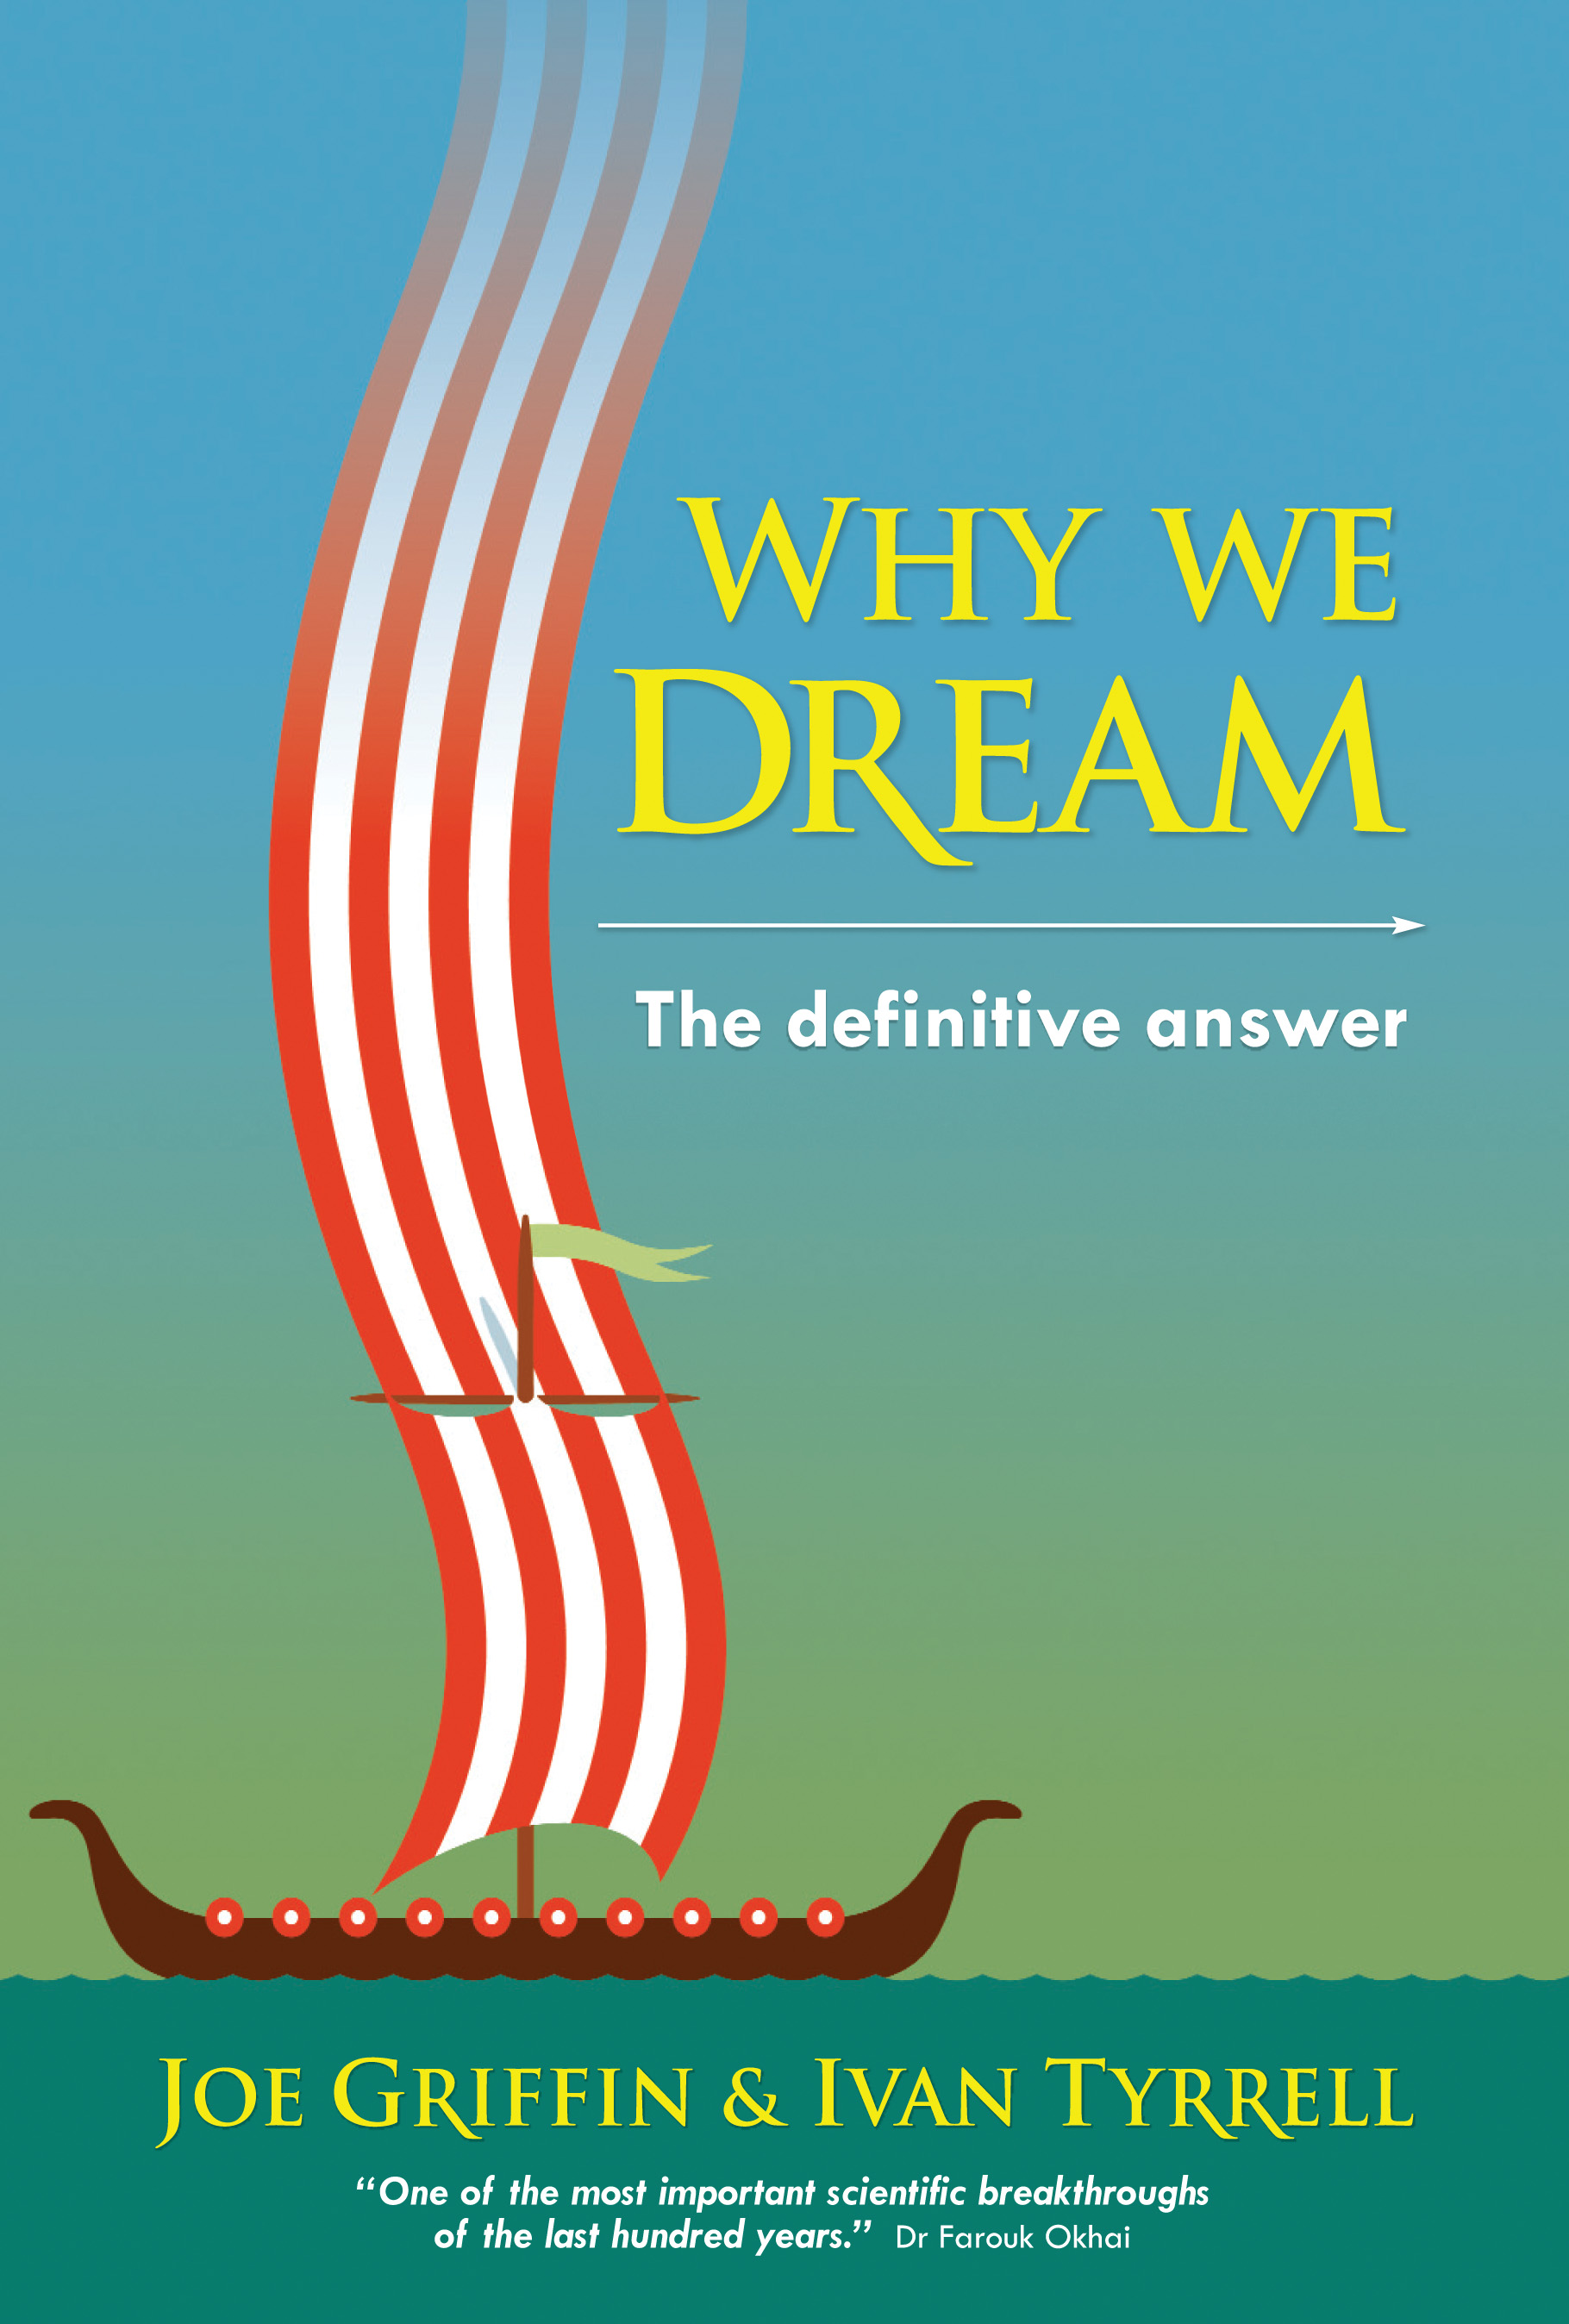 Why we dream: The definitive answer